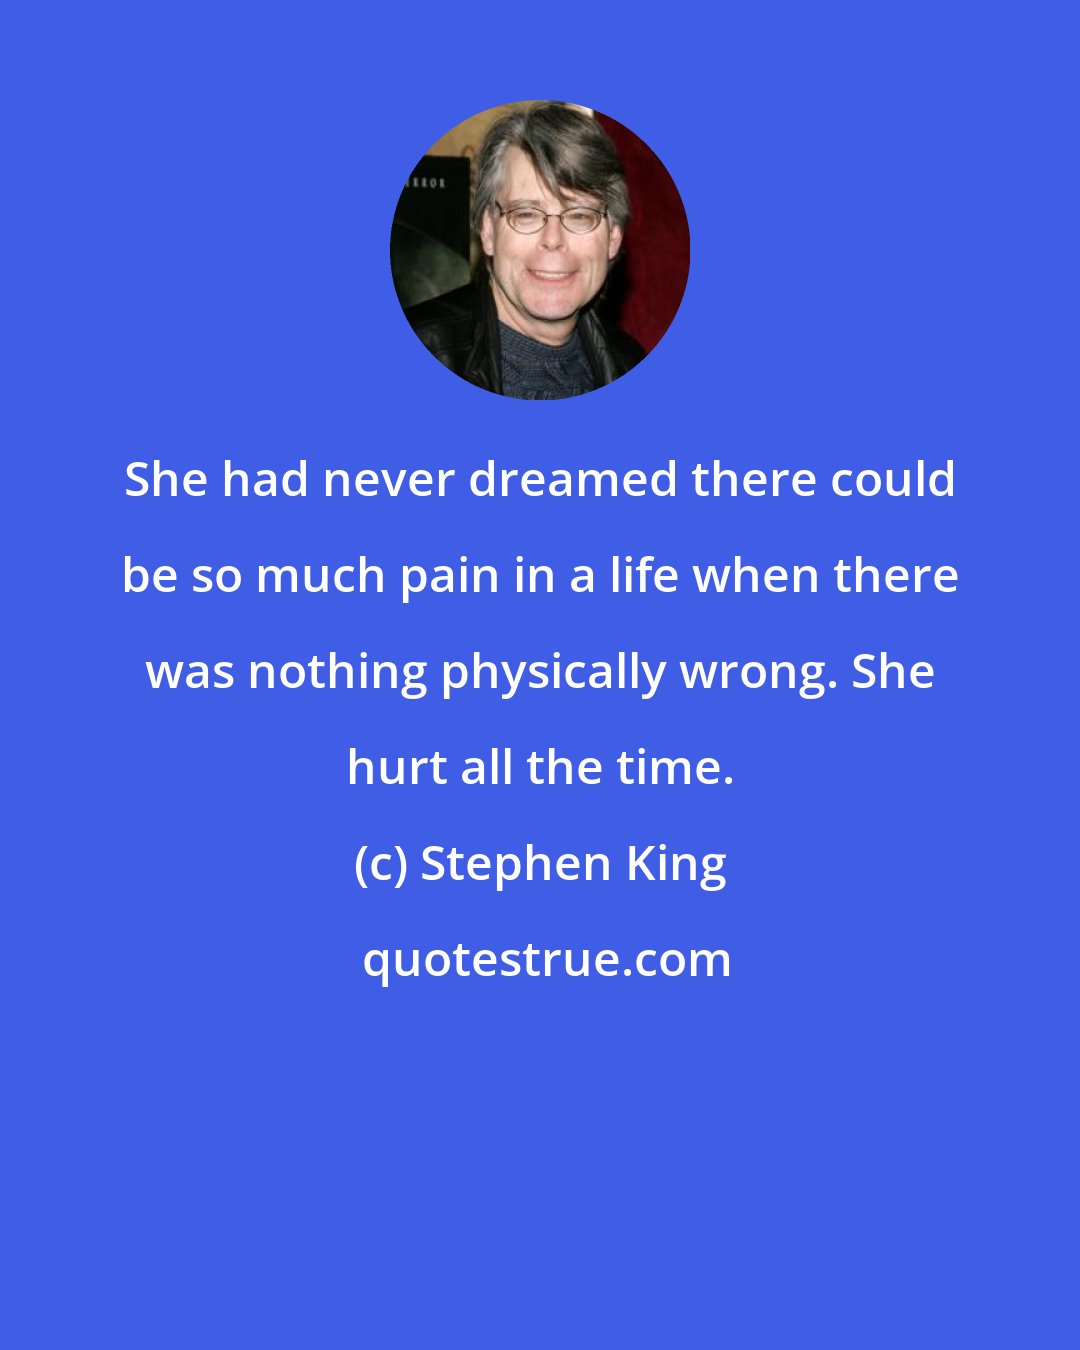 Stephen King: She had never dreamed there could be so much pain in a life when there was nothing physically wrong. She hurt all the time.